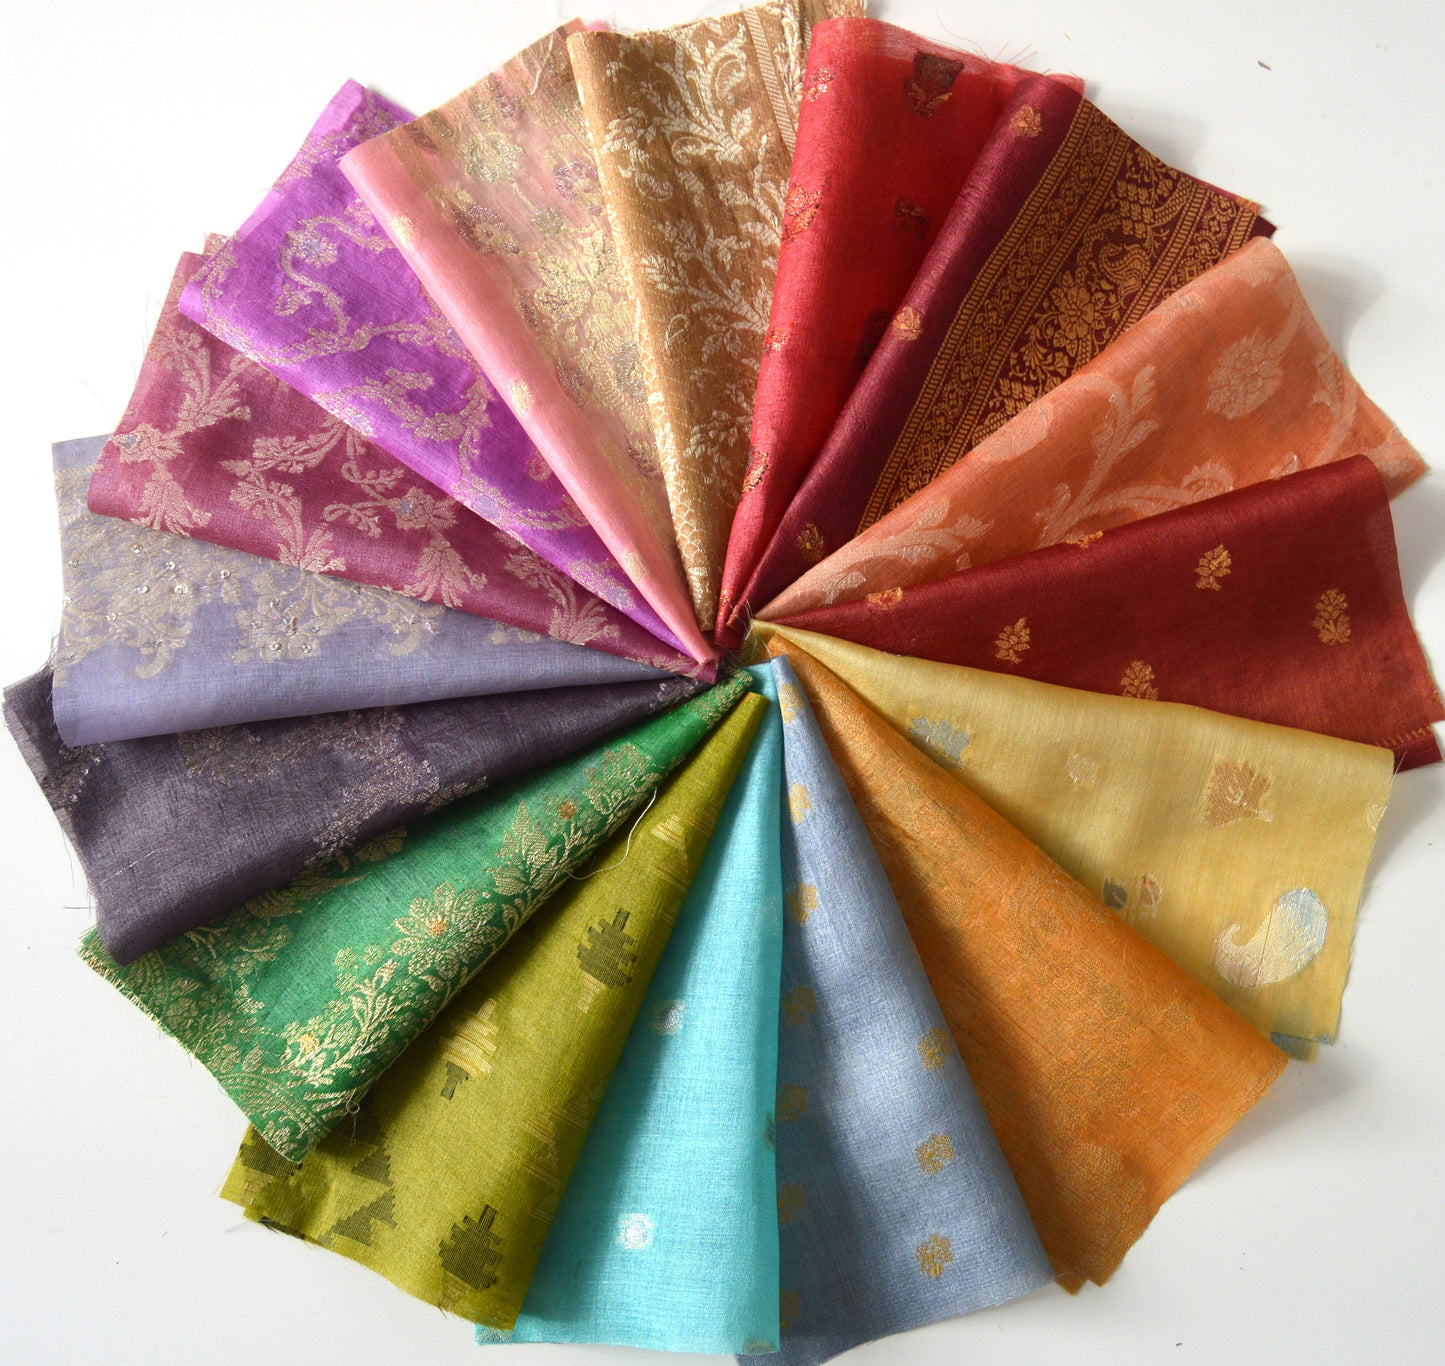 8 Inch x 16 Pieces Mixed Colour Recycled Vintage Silk Sari Scraps Remnant Brocade Craft Fabric Collage Mixed Media Textile Art Junk Journals